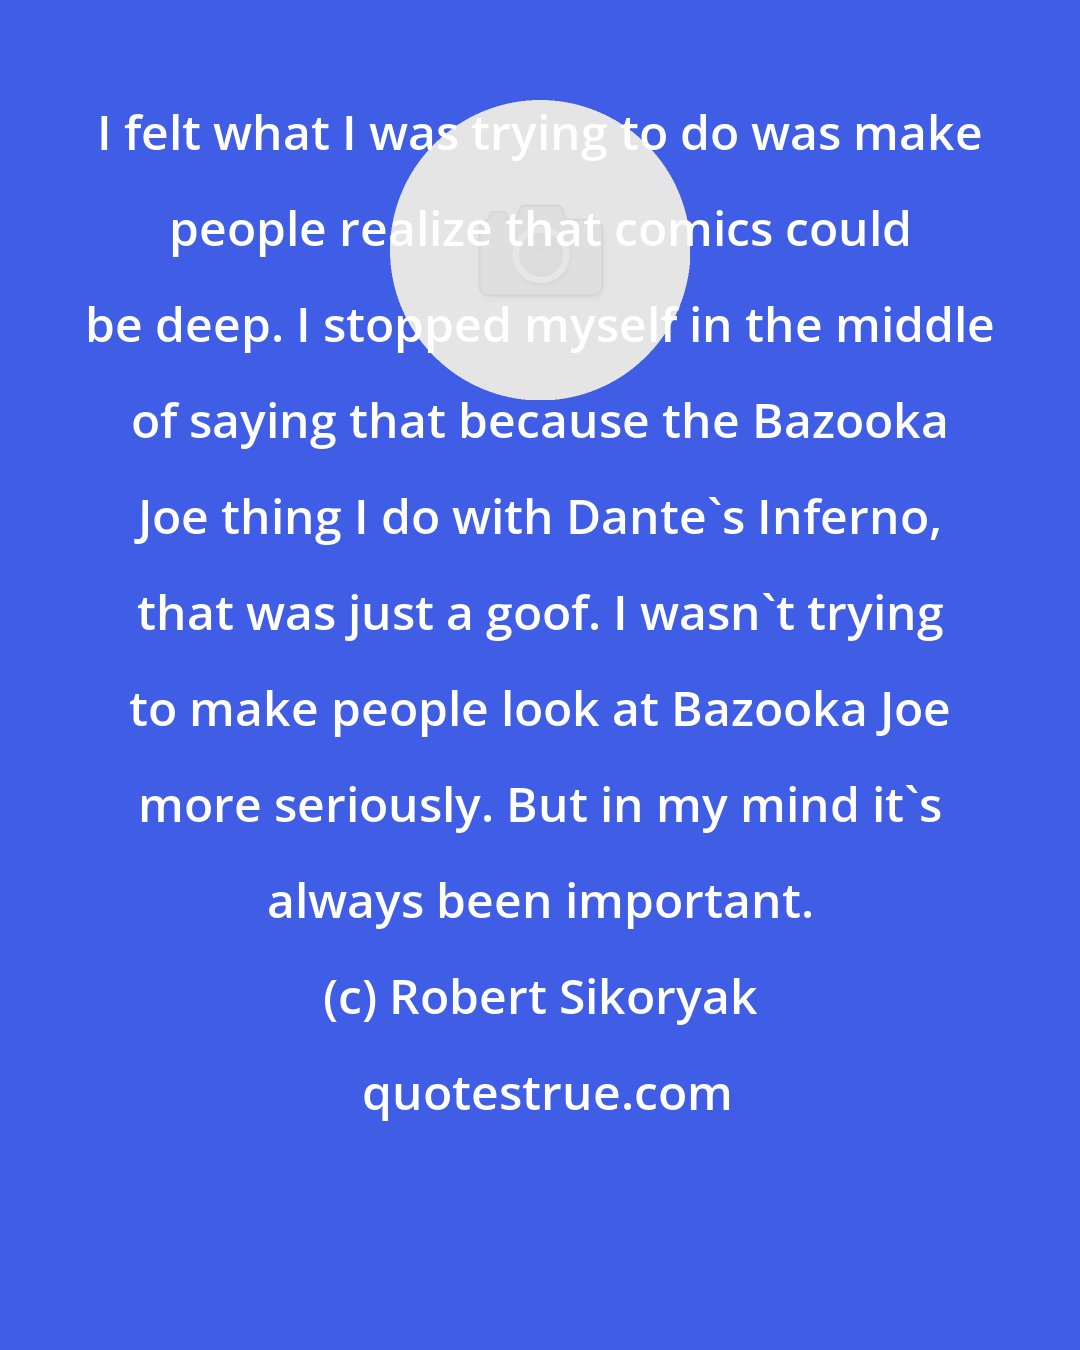 Robert Sikoryak: I felt what I was trying to do was make people realize that comics could be deep. I stopped myself in the middle of saying that because the Bazooka Joe thing I do with Dante's Inferno, that was just a goof. I wasn't trying to make people look at Bazooka Joe more seriously. But in my mind it's always been important.